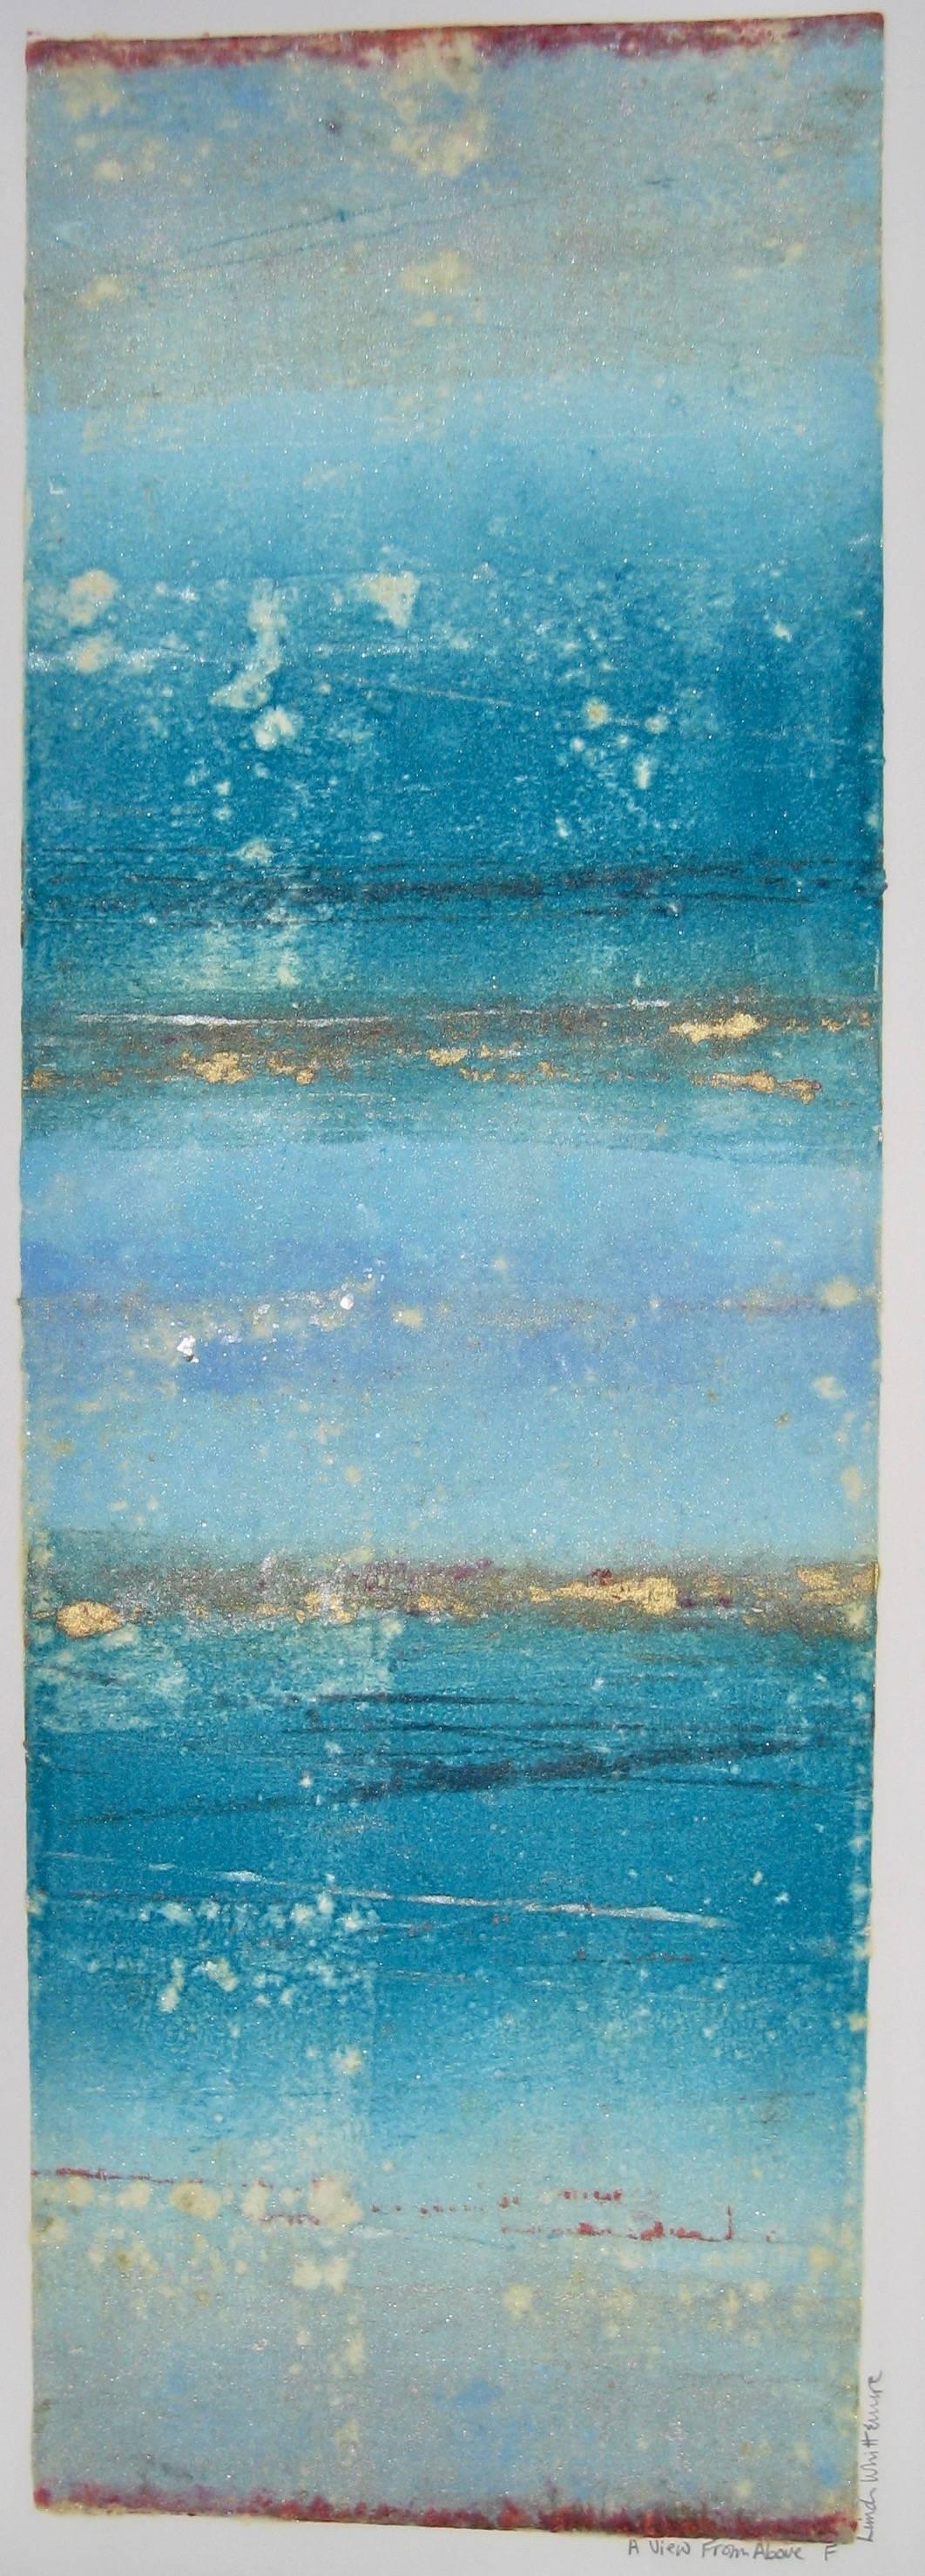 Cool turquoise and blues are streaked with colorful gold and red accents that  play across this beautiful abstract original work "Glassy Day II" by master print maker Linda Whittemore. This mixed media viscosity monotype displays all of the unique